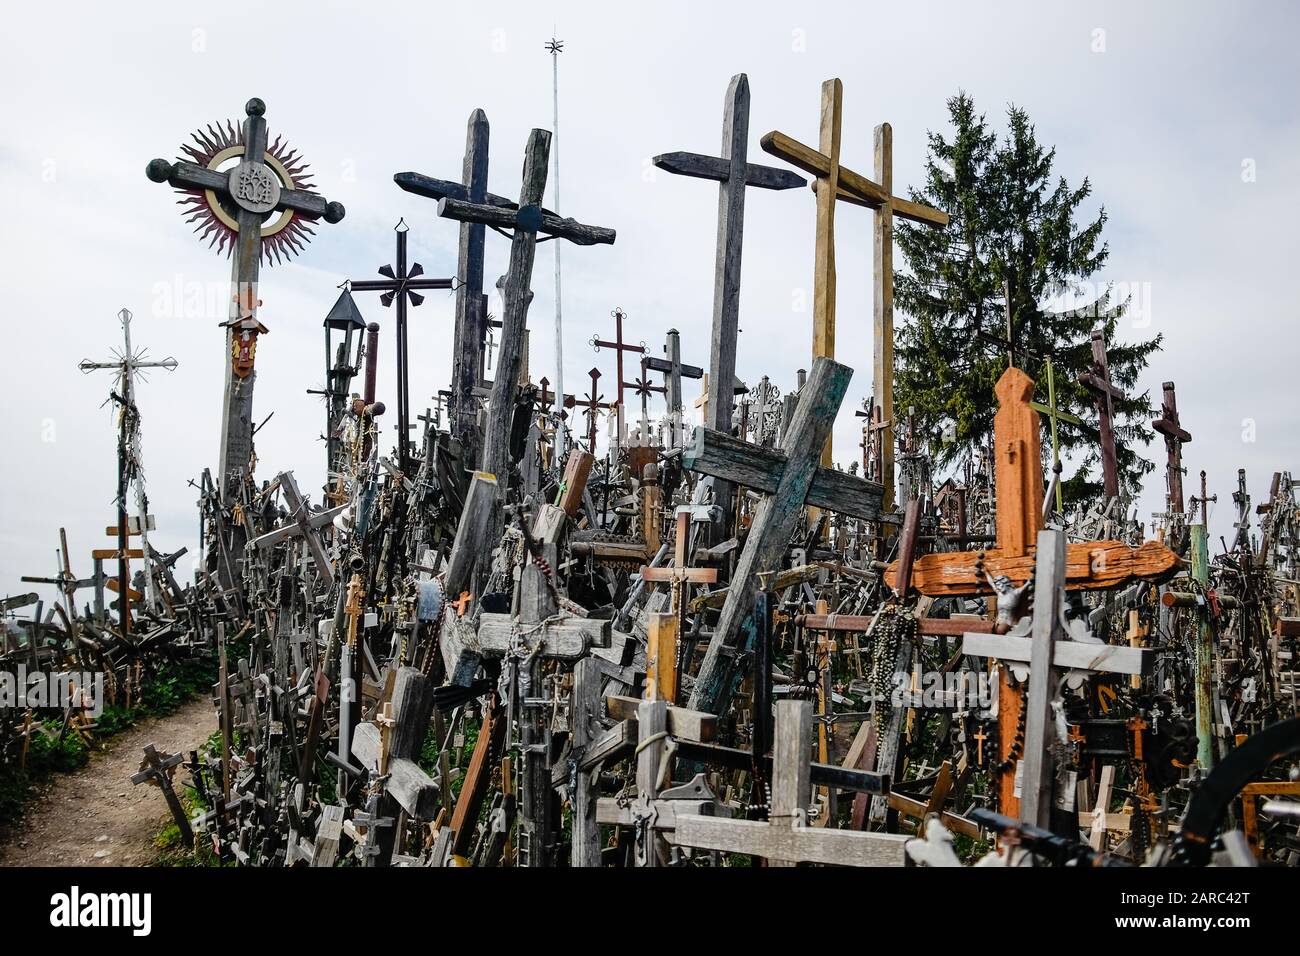 An abundance of crosses at a holy pilgrimage site Stock Photo